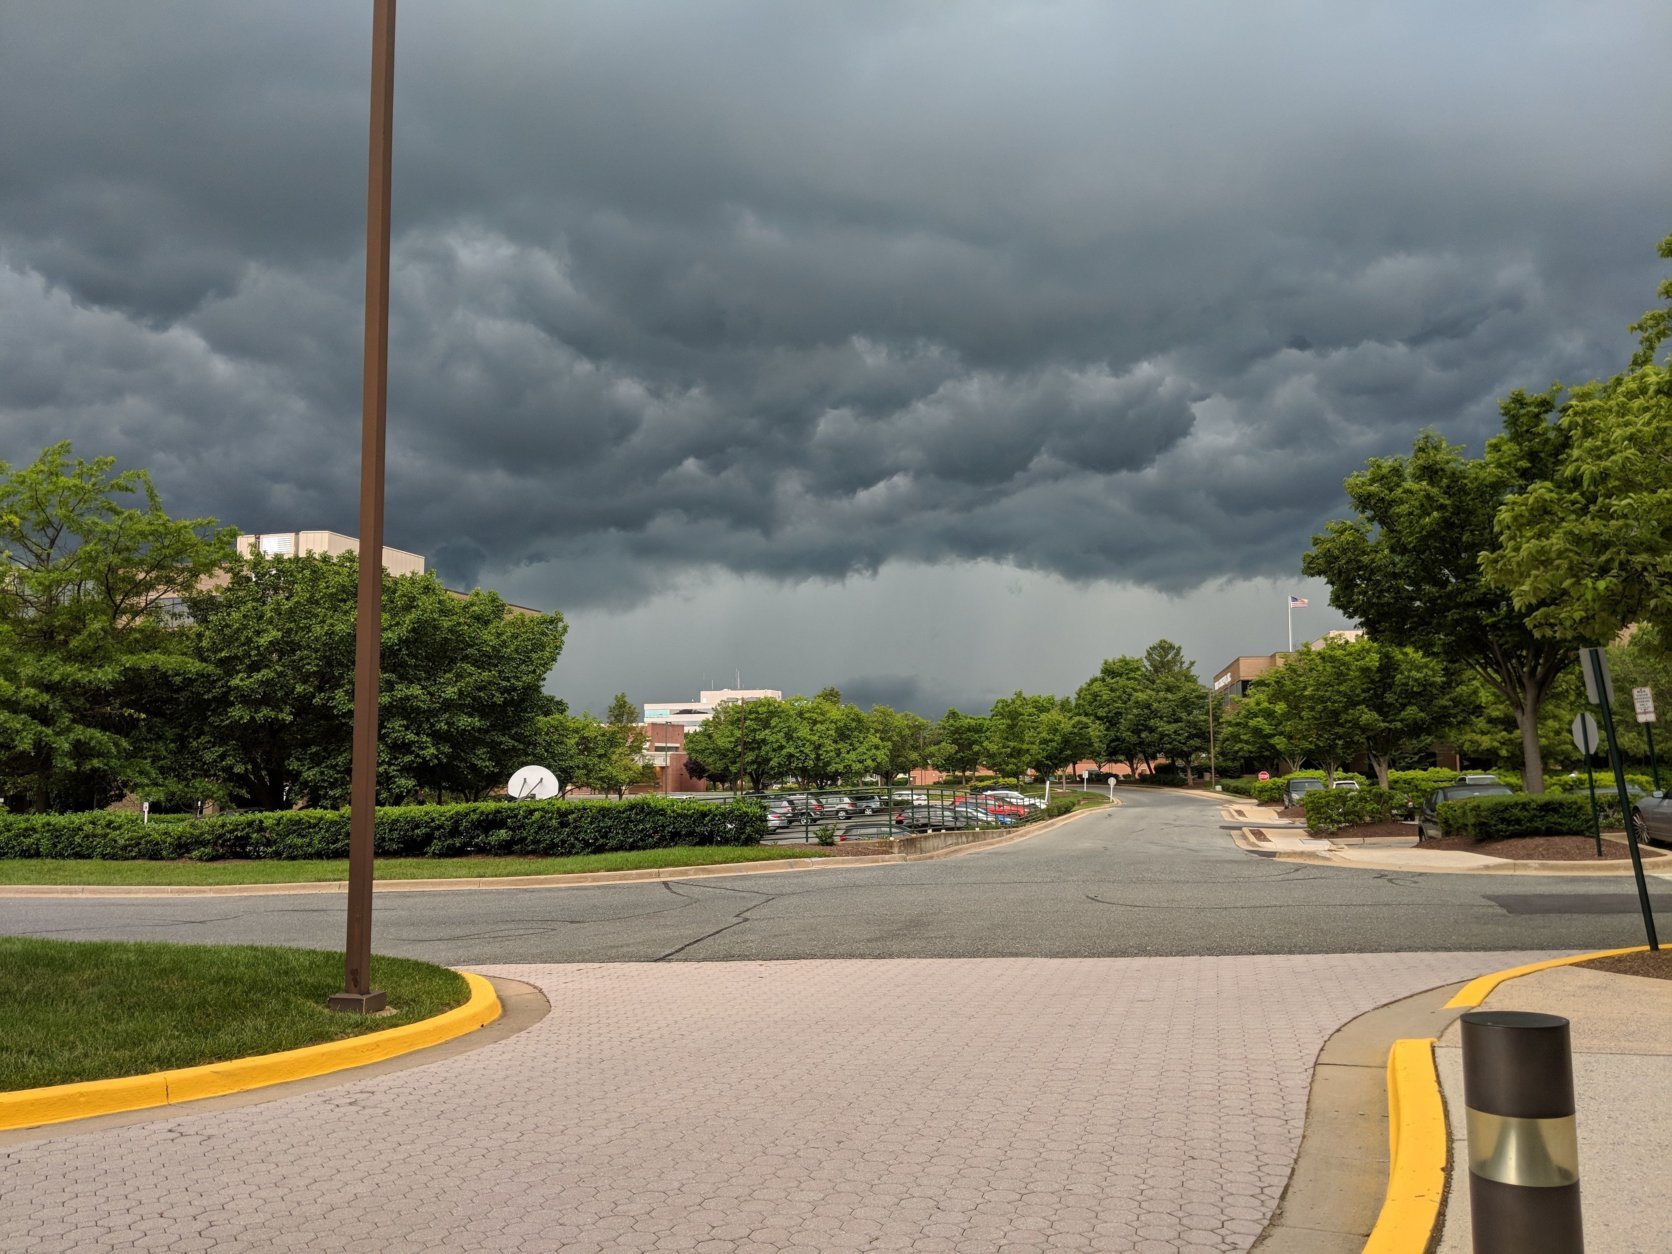 Here's what Gaithersburg, Maryland, looked like at 5:40 p.m. on Thursday, May 31, 2018. (Courtesy Mindy Pierce)